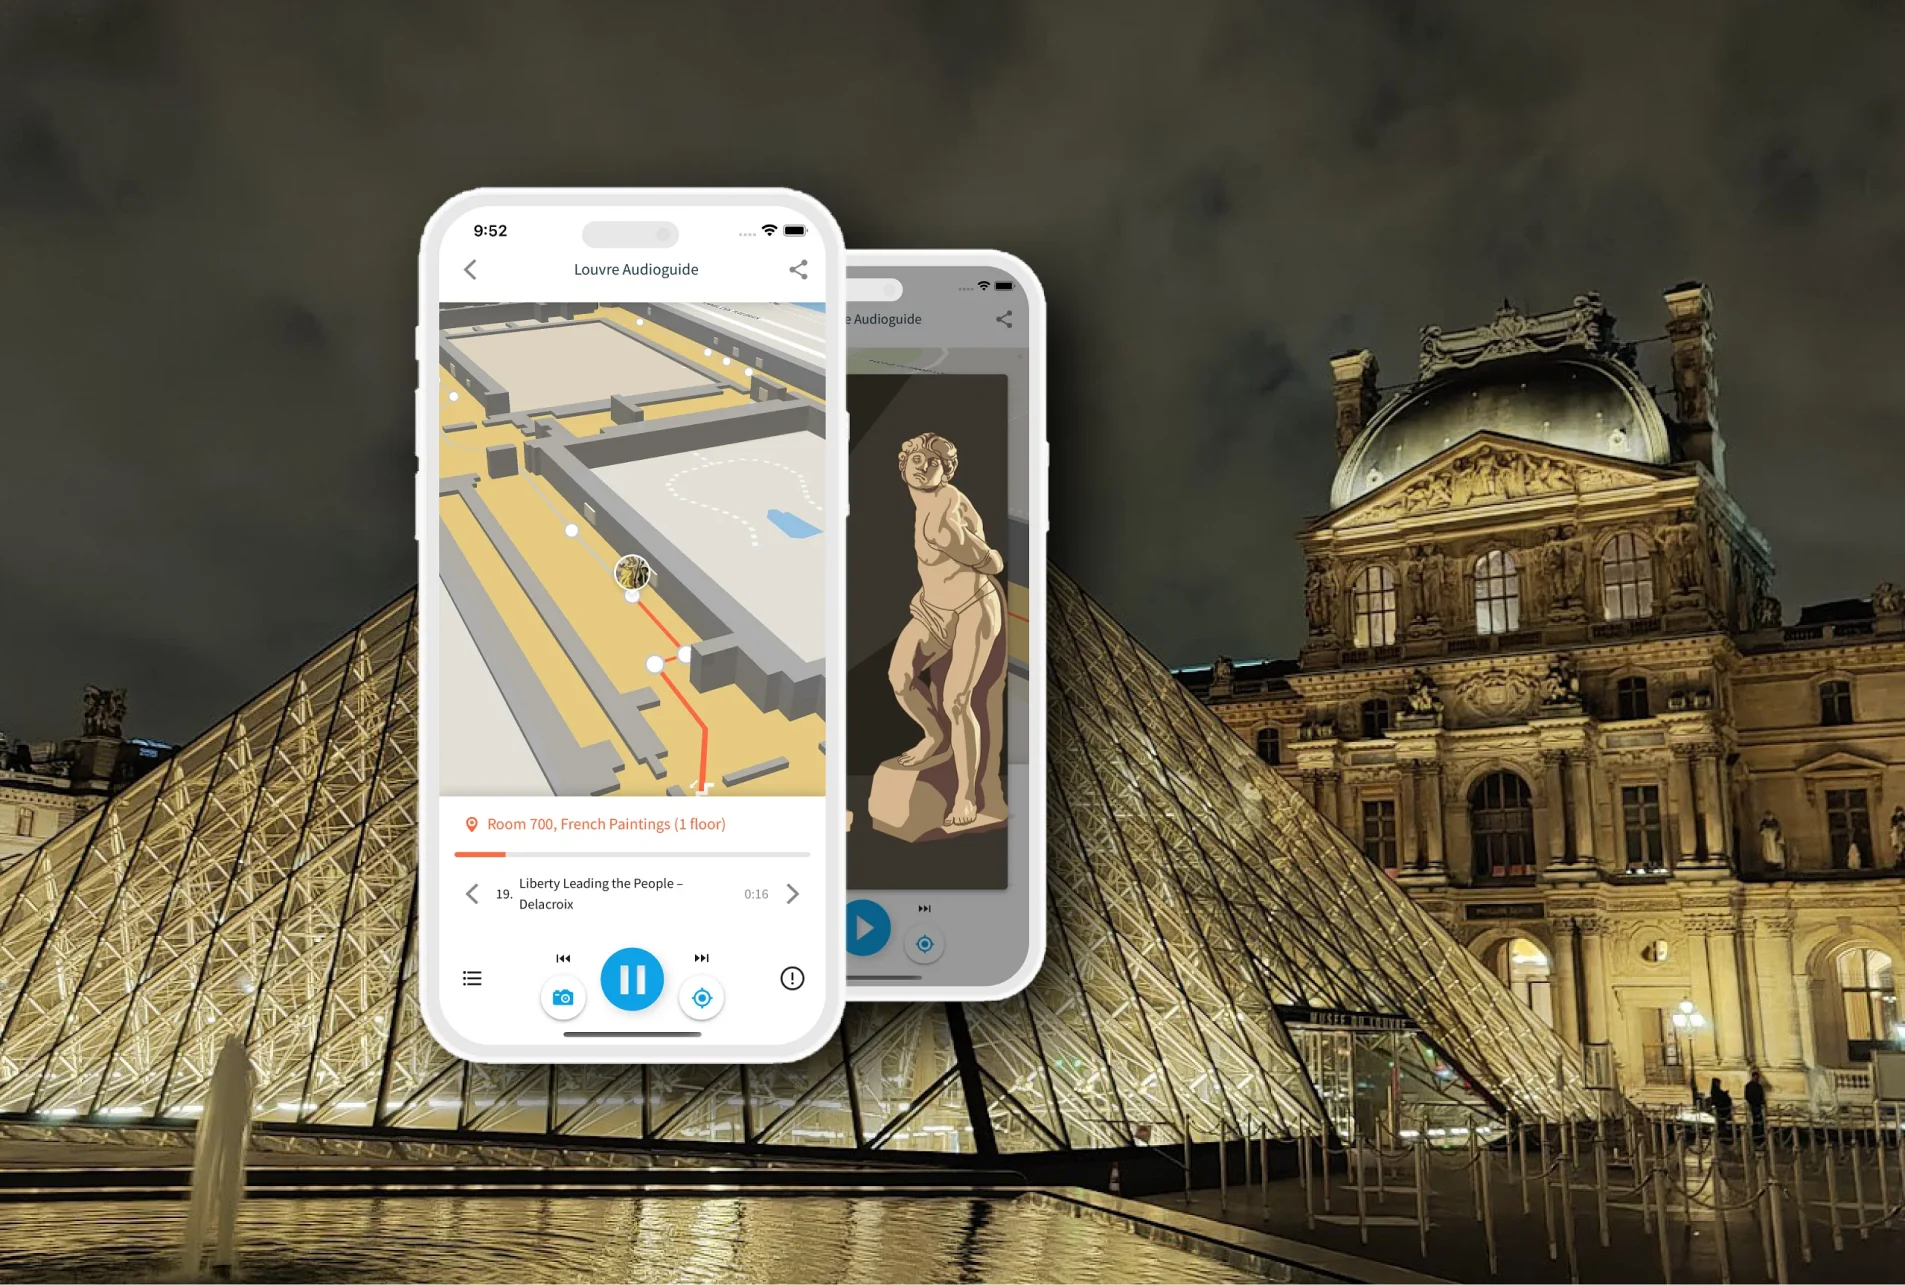 Audio guide for the Louvre in Paris, France.